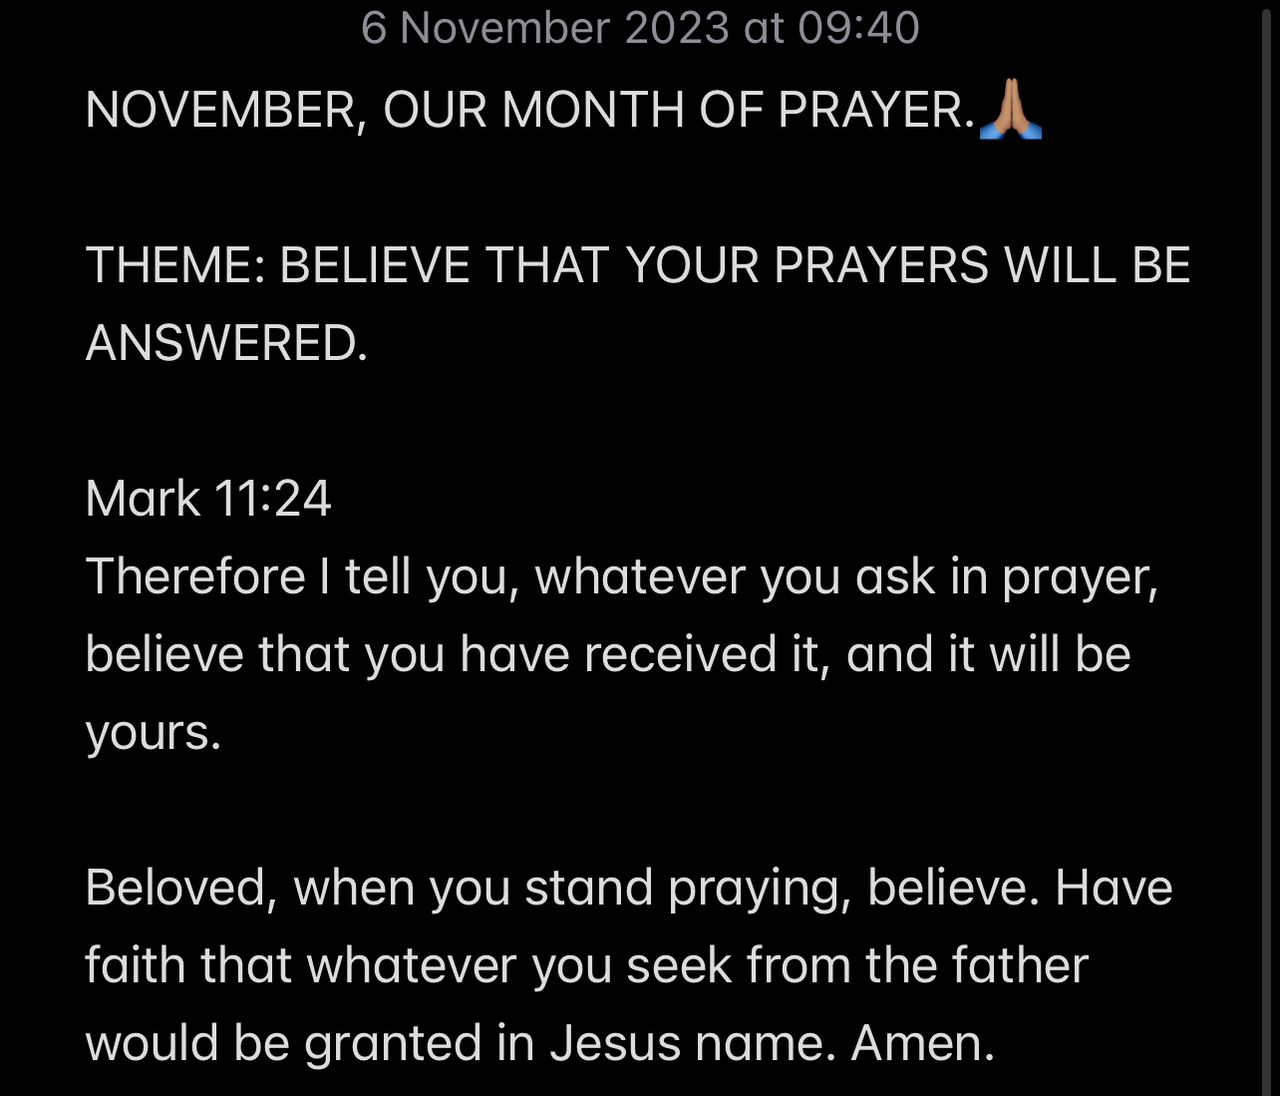 BELIEVE THAT YOUR PRAYERS WILL BE ANSWERED.